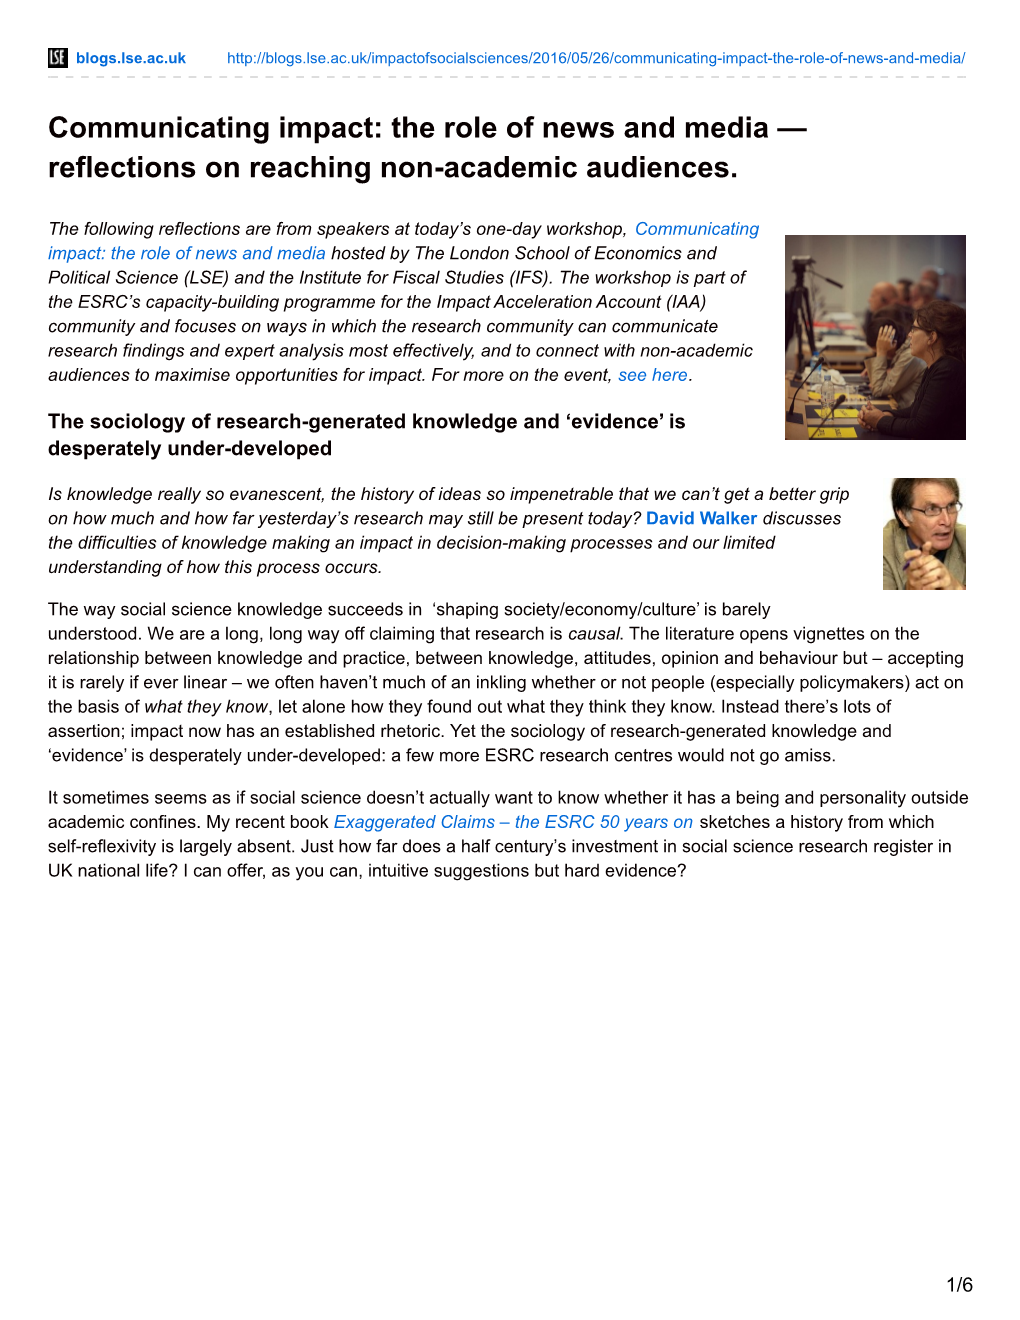 Communicating Impact: the Role of News and Media — Reflections on Reaching Non-Academic Audiences